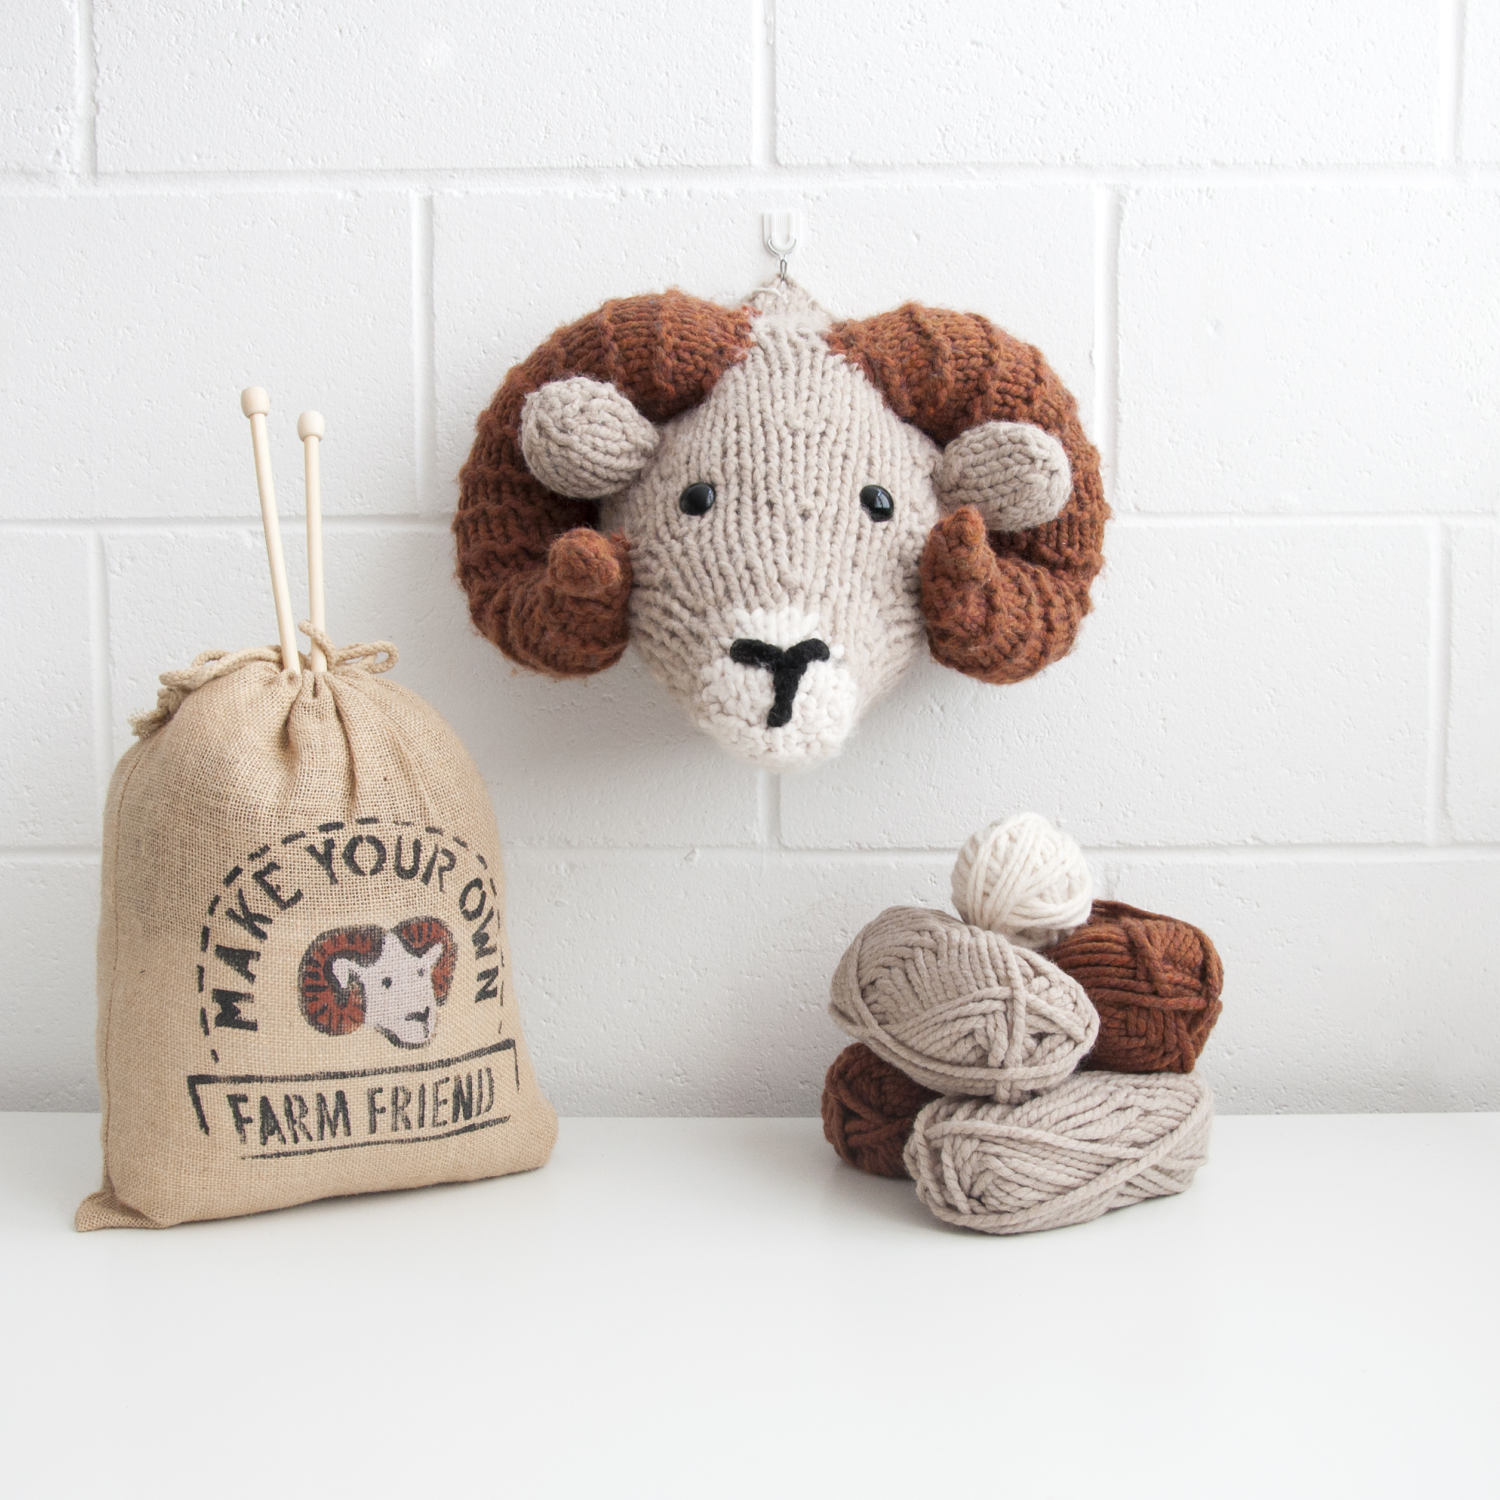 Sincerely Louise Knitted Animal Head Kits